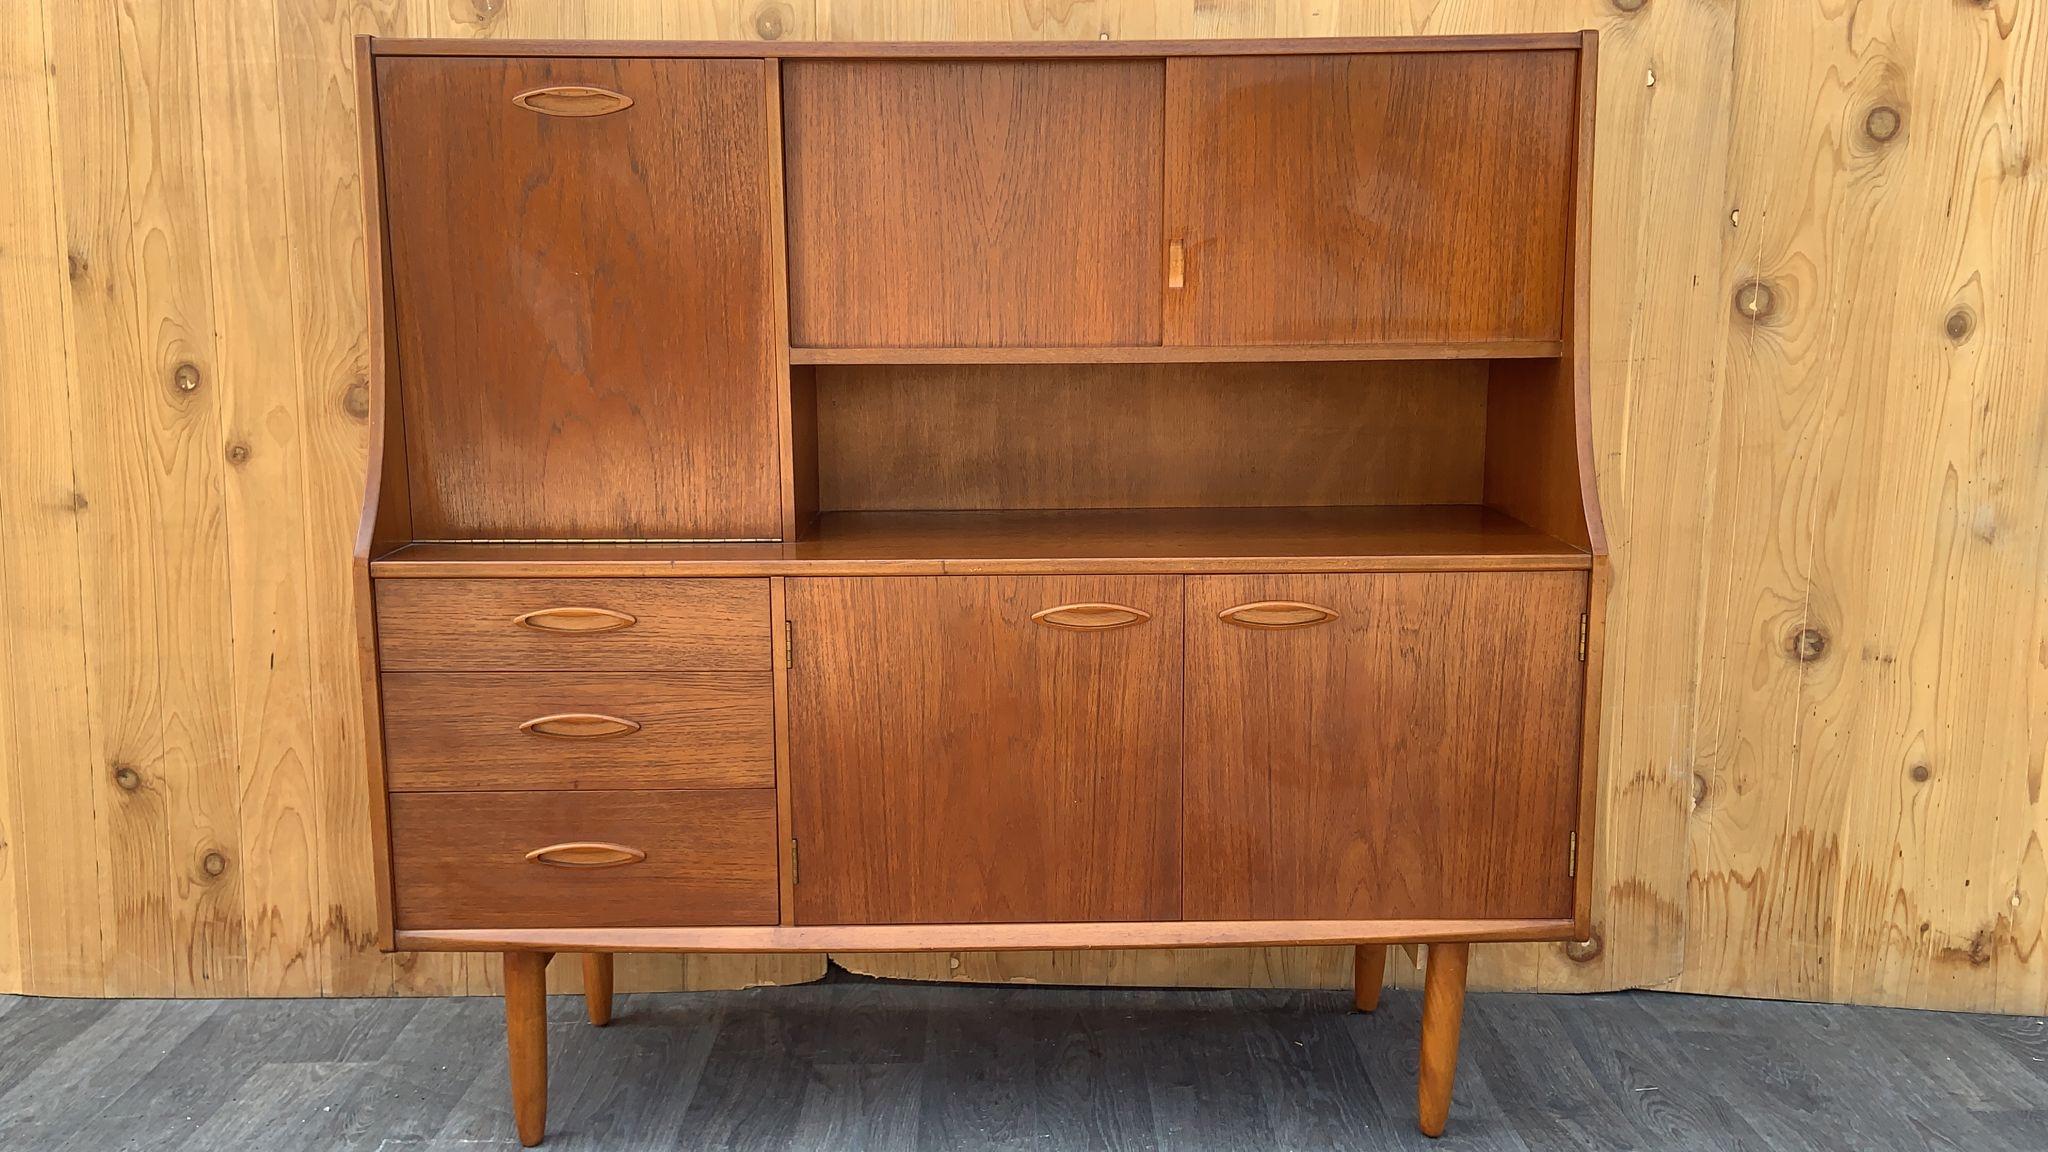 Mid Century Modern Teak Highboard by Jentique 

This Teak Mid Century Modern highboard was produced by Jentique. This highboard has a drop front bar and sliding door cupboard up top, and the base has three drawers and a double-door cupboard. This is